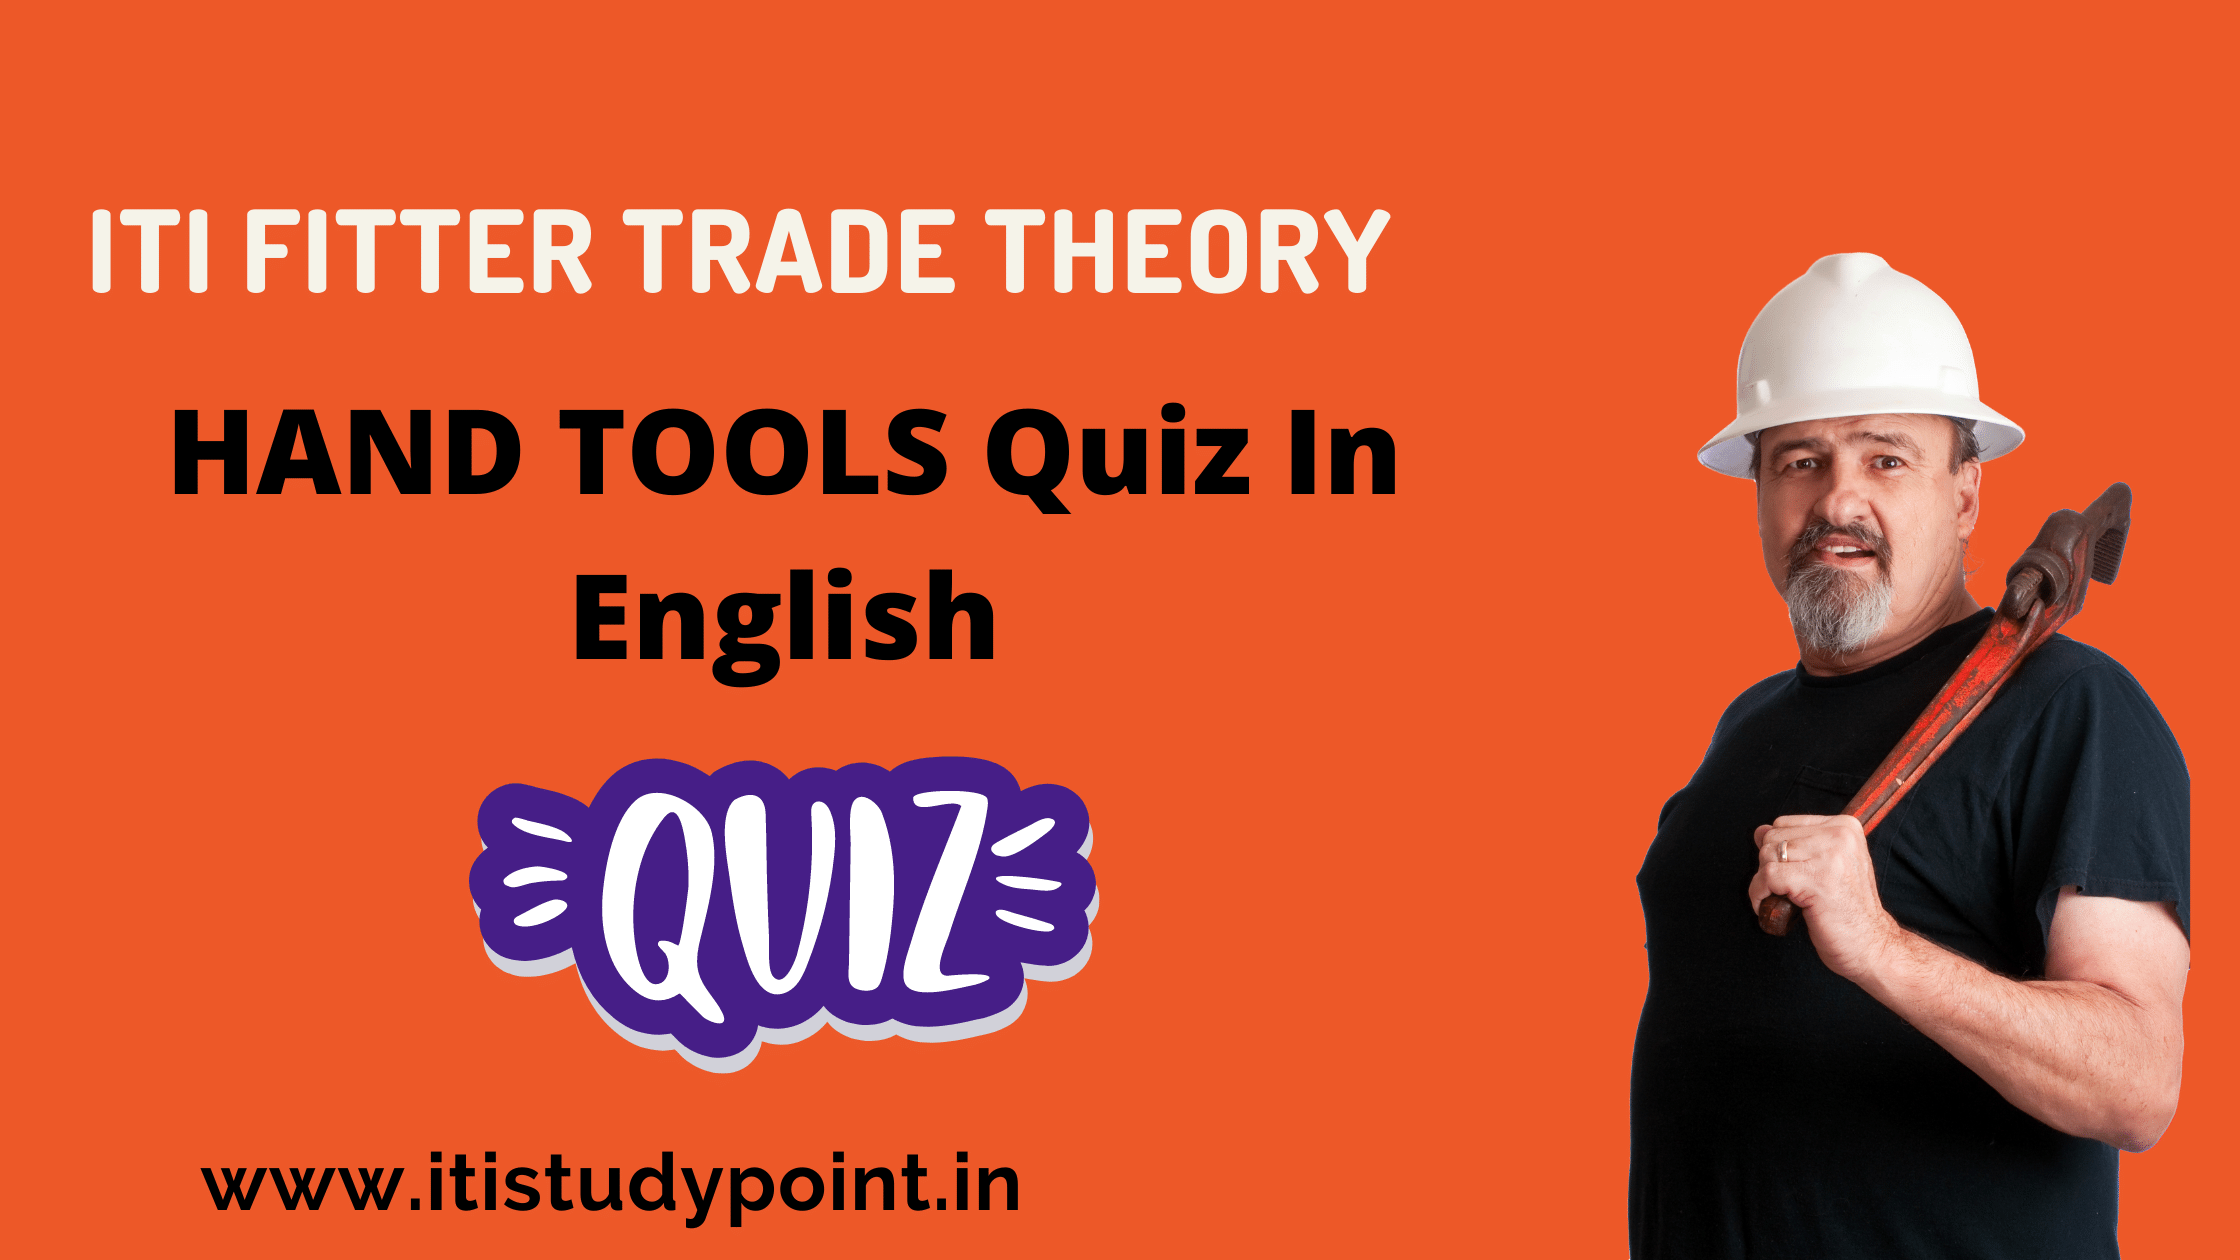 HAND TOOLS Quiz In English || ITI Fitter Trade Theory ||